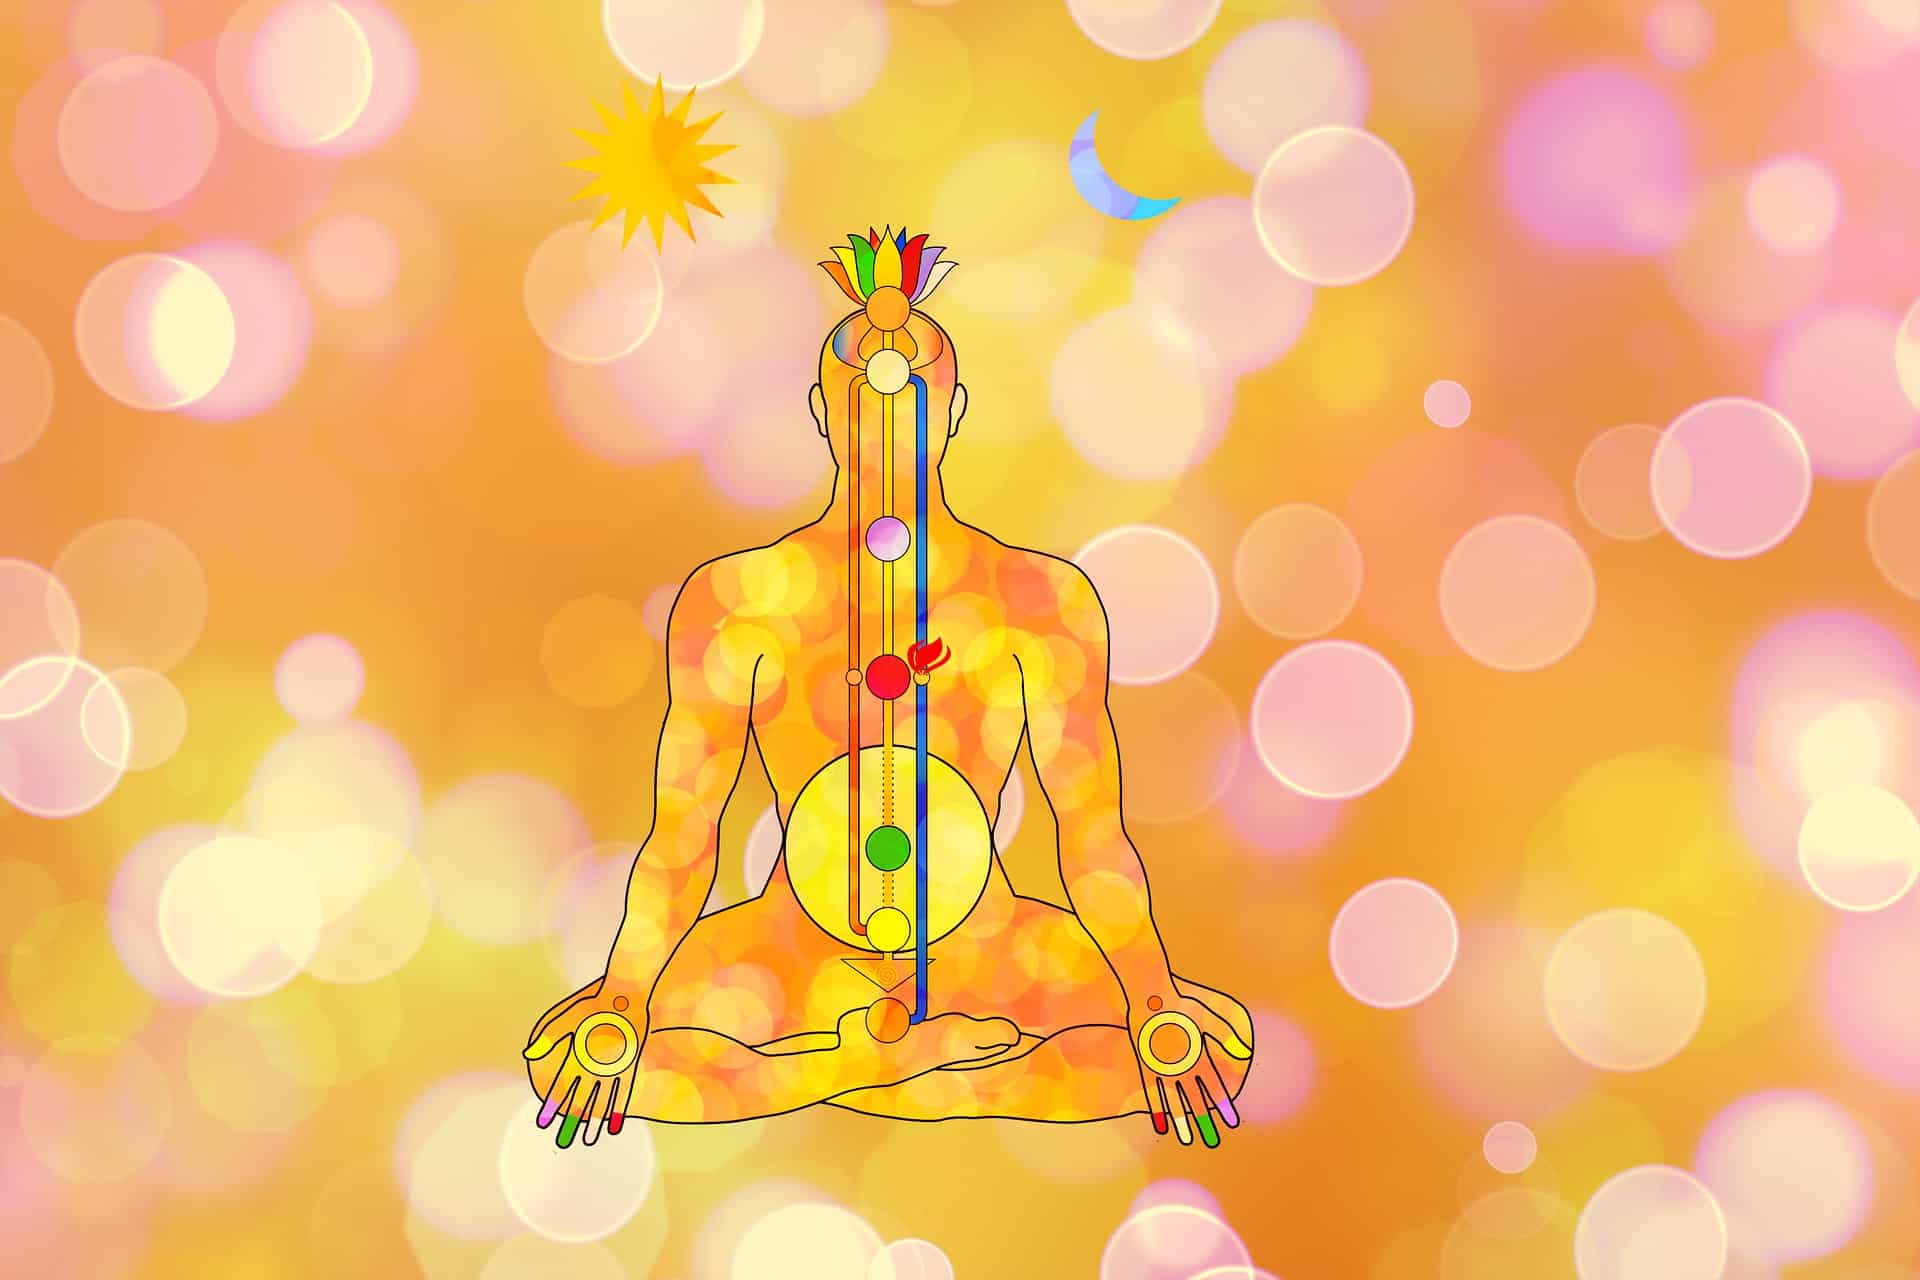 Which are the Gods/ Goddesses and Colors associated with the 7 Chakras in our body?